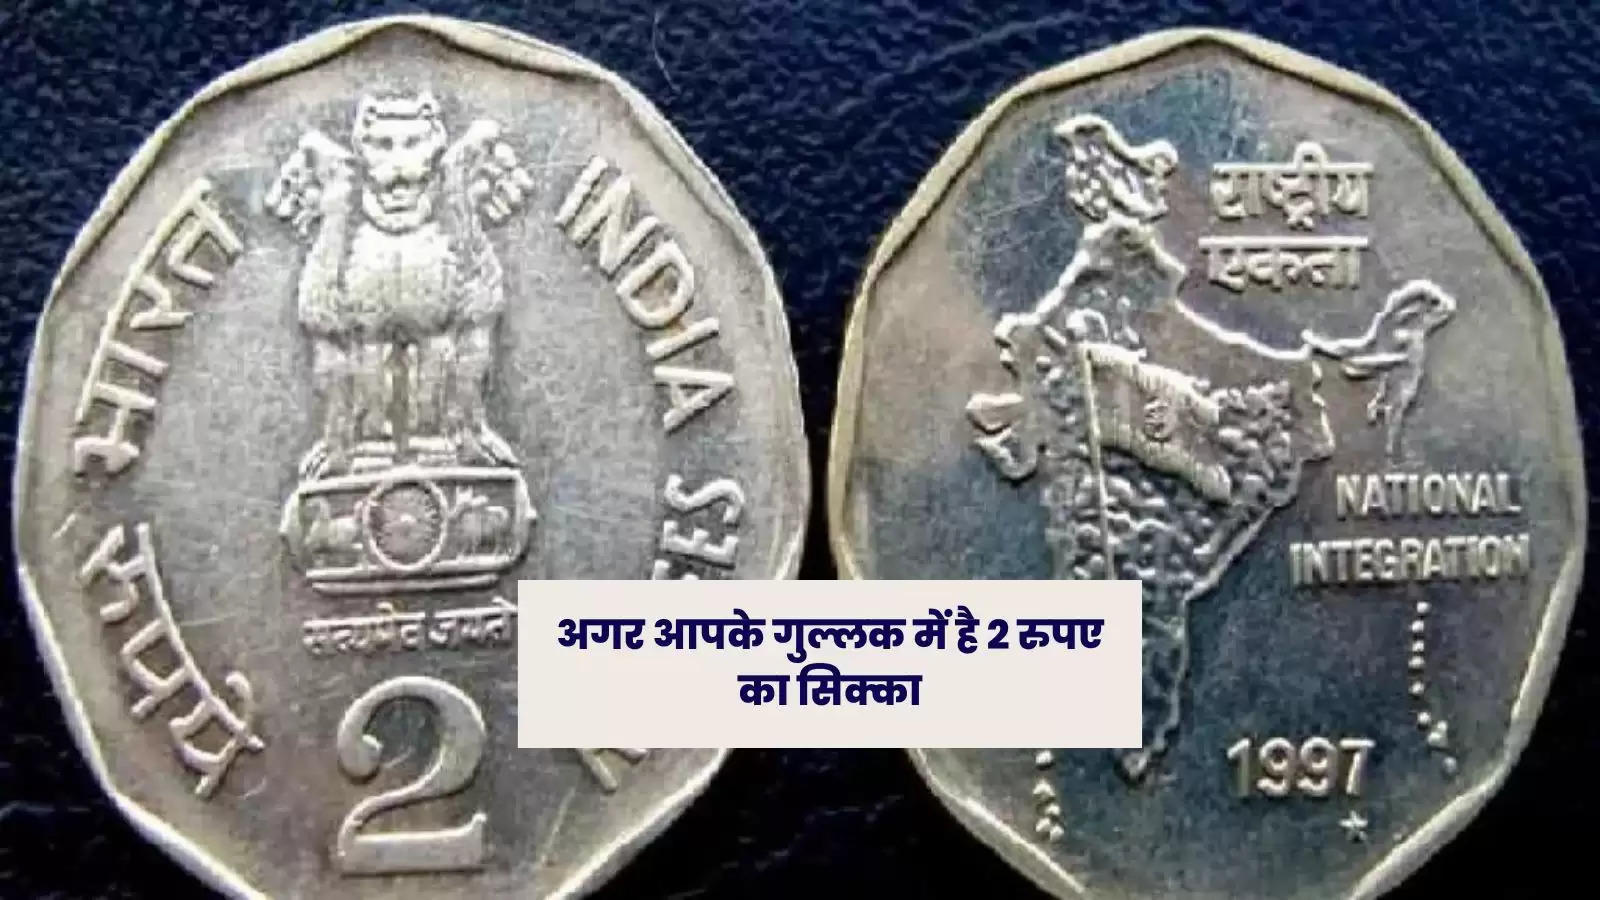 This coin of 2 rupees